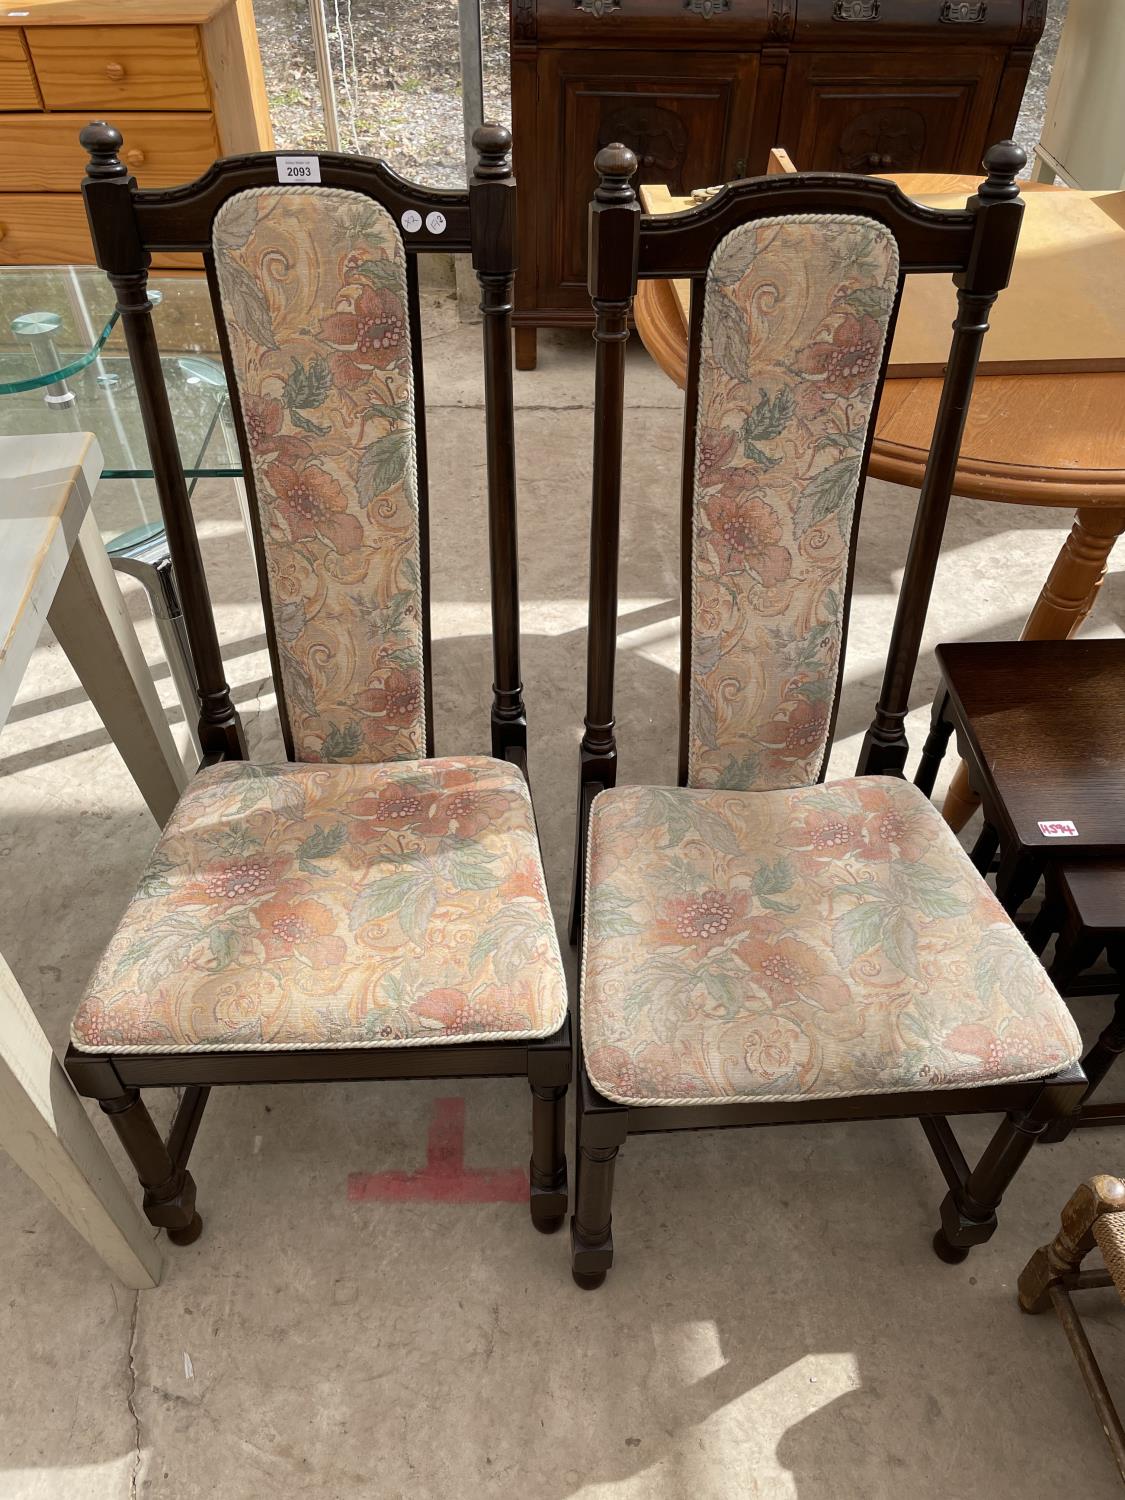 A PAIR OF ERCOL DINING CHAIRS WITH UPHOLSTERED SEATS AND BACKS